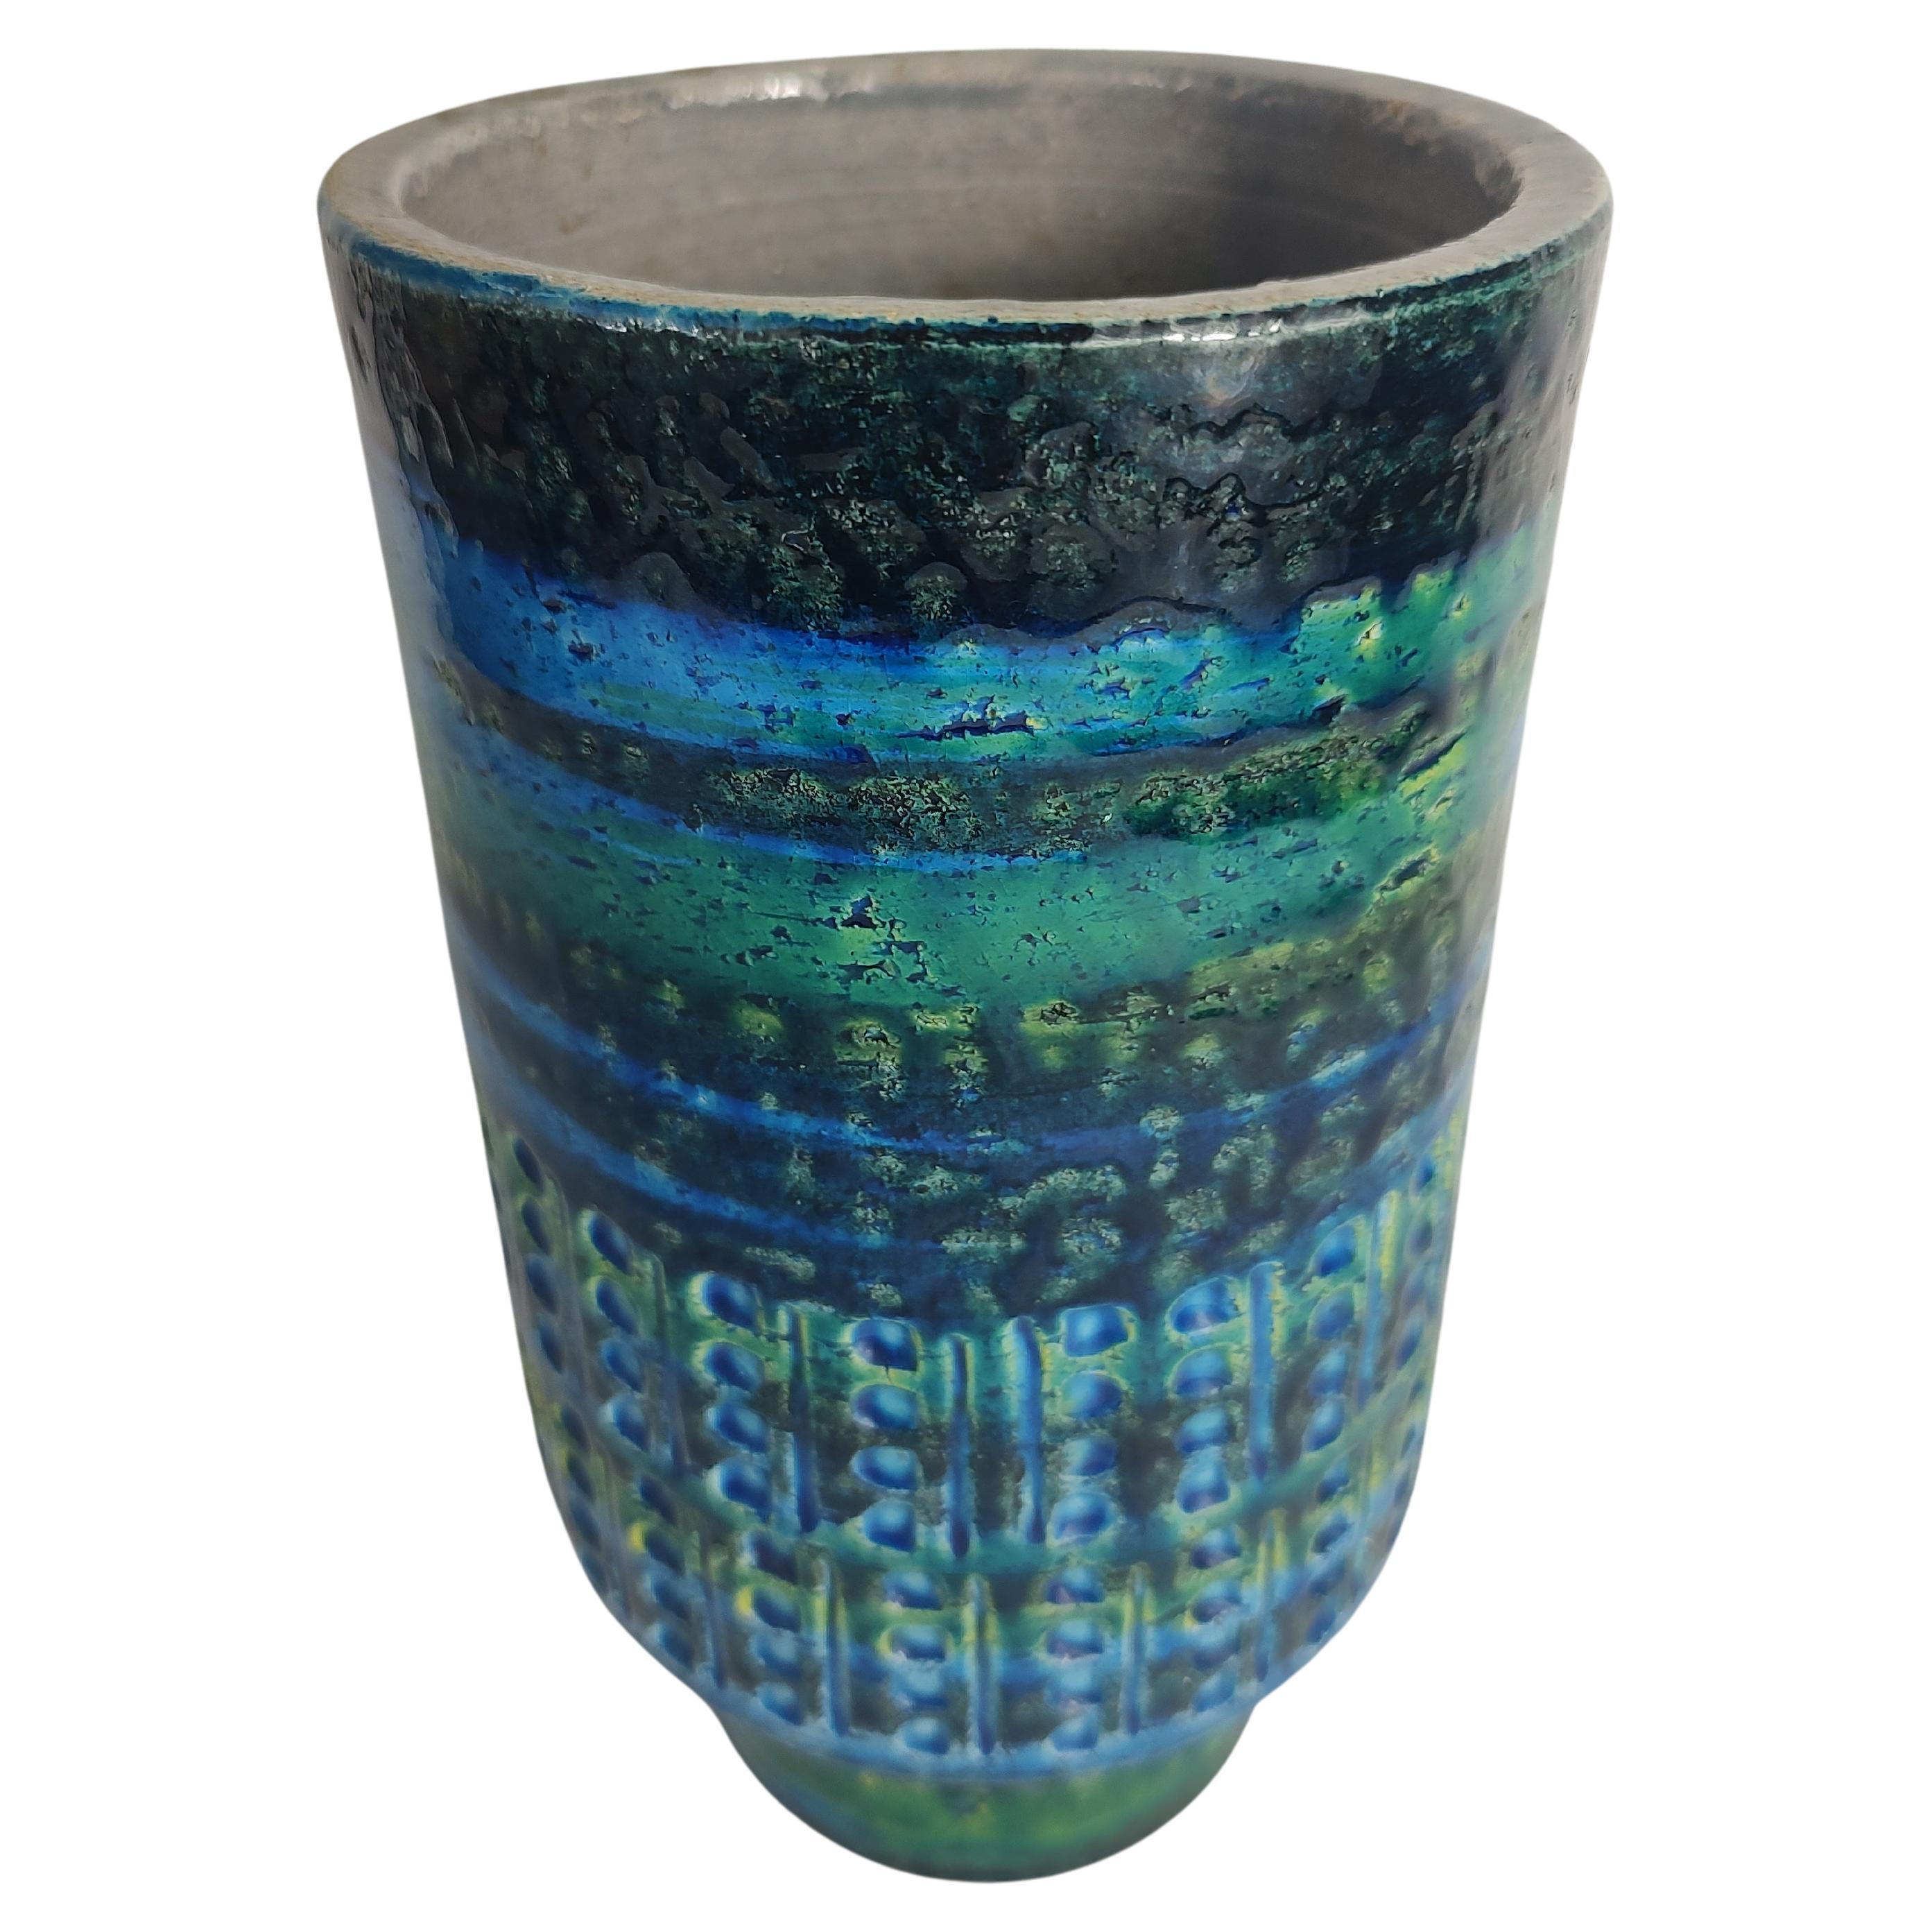 Fabulous cylindrical vase in Rimini Blue by Aldo Londi and Bitossi. Deep impressions surround the vase with a serene mix of blues and green. In excellent vintage condition with no visible chips or cracks. Vase has a set back pedestal like base.